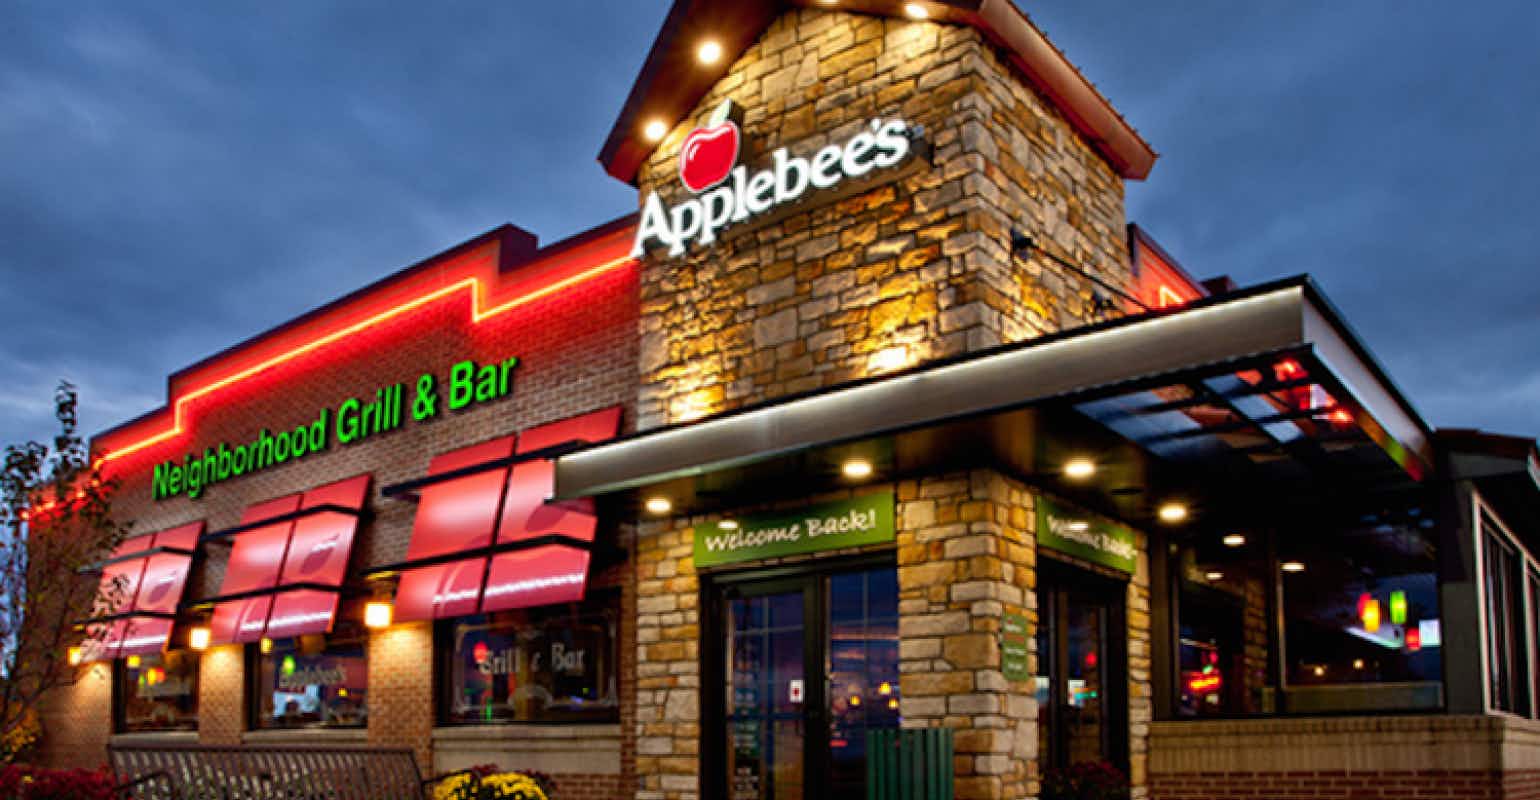 An Applebee's storefront lit up at night.